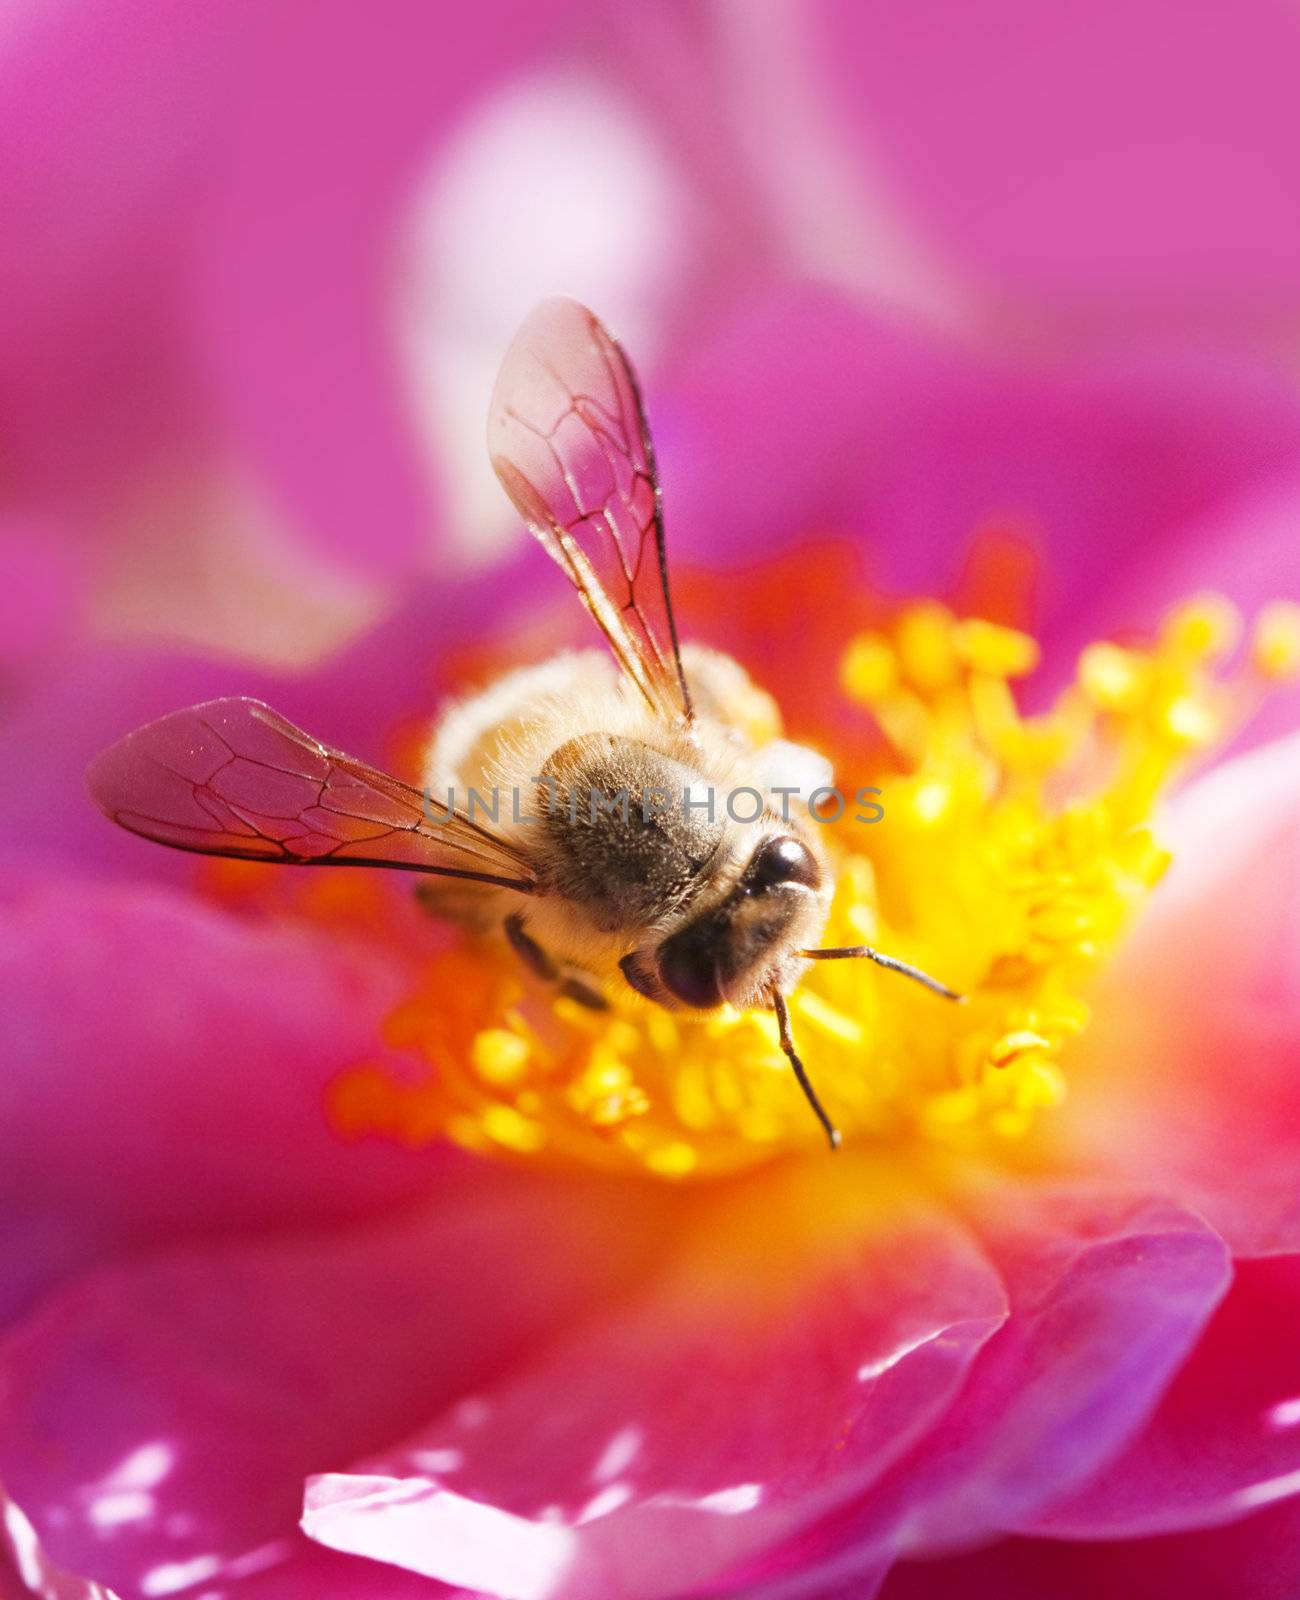 Bee collecting honey on a pink flower